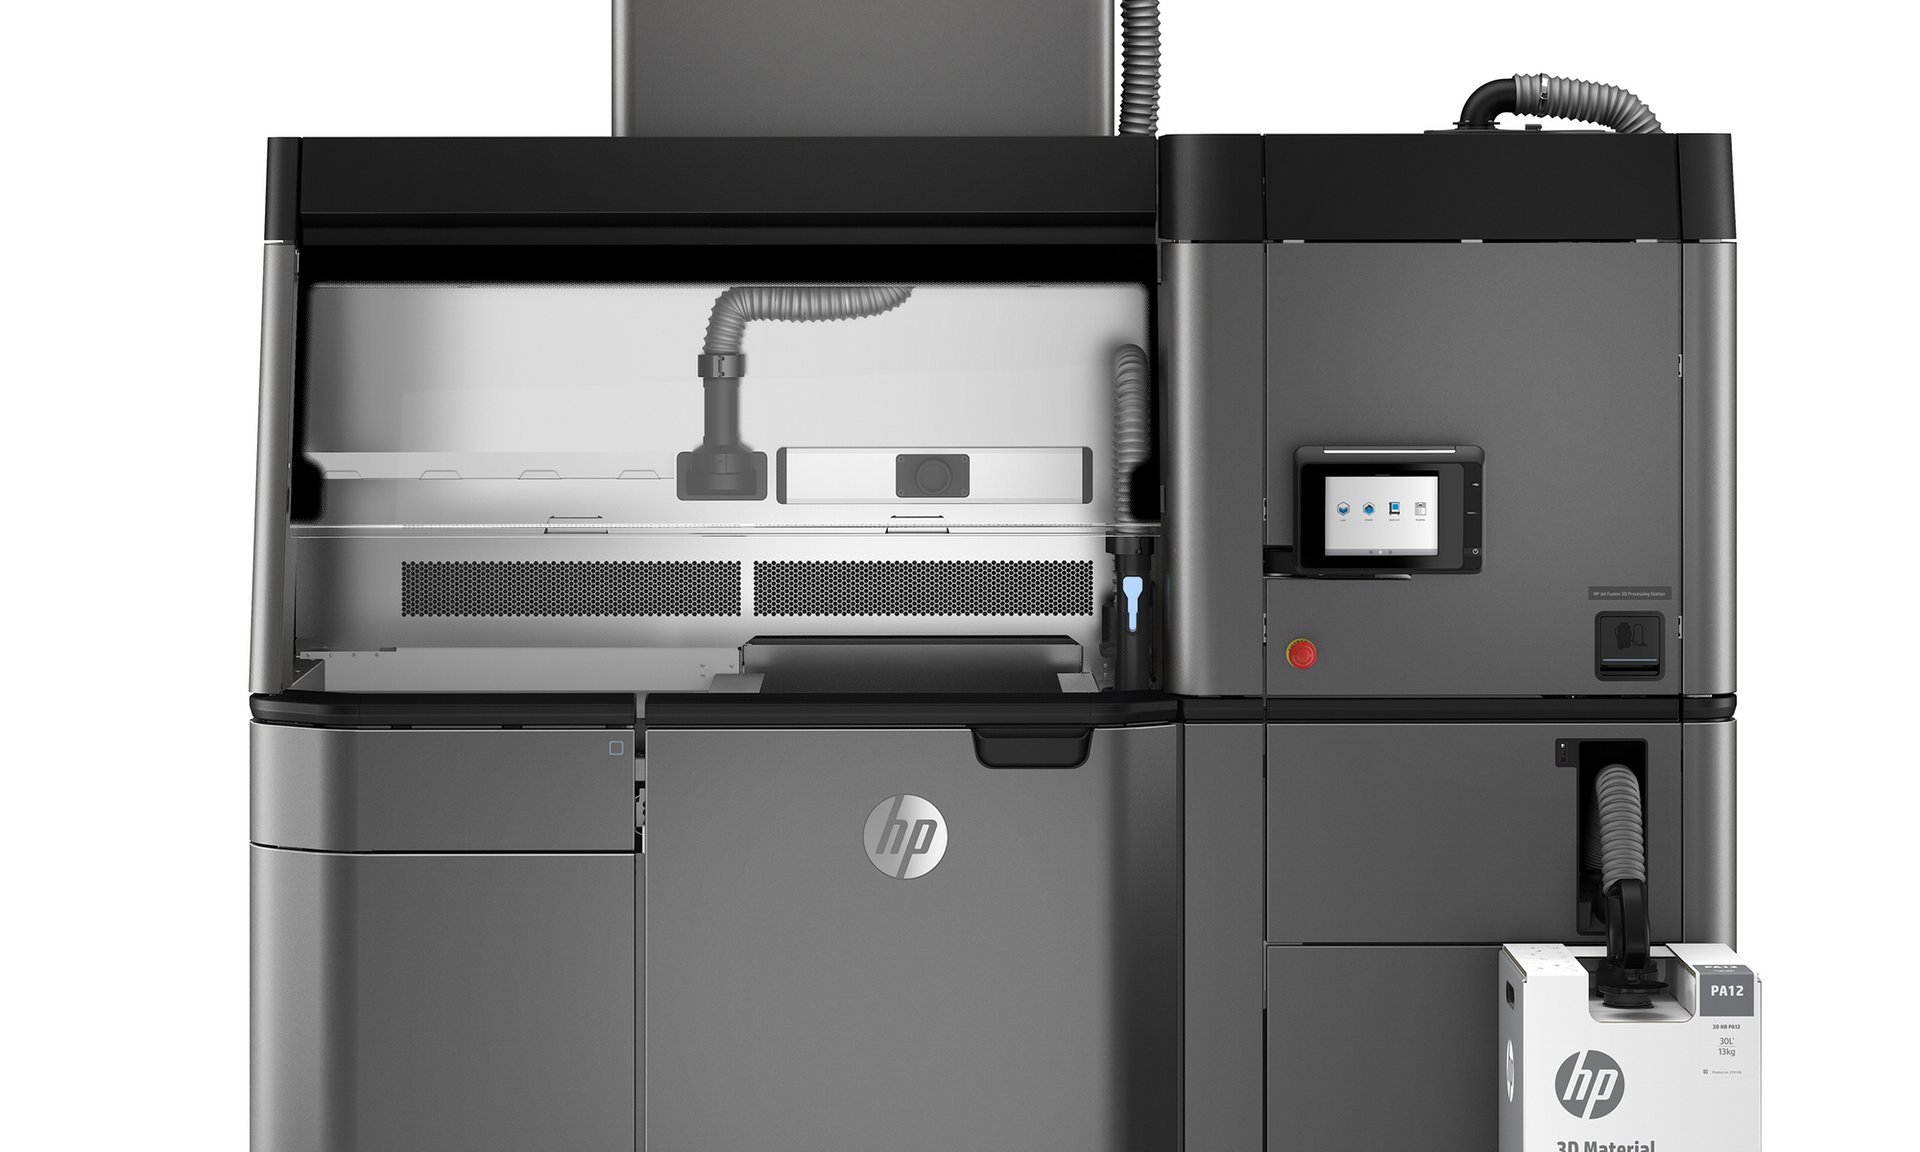  HP's new 3D printer uses many 3D printed parts itself 